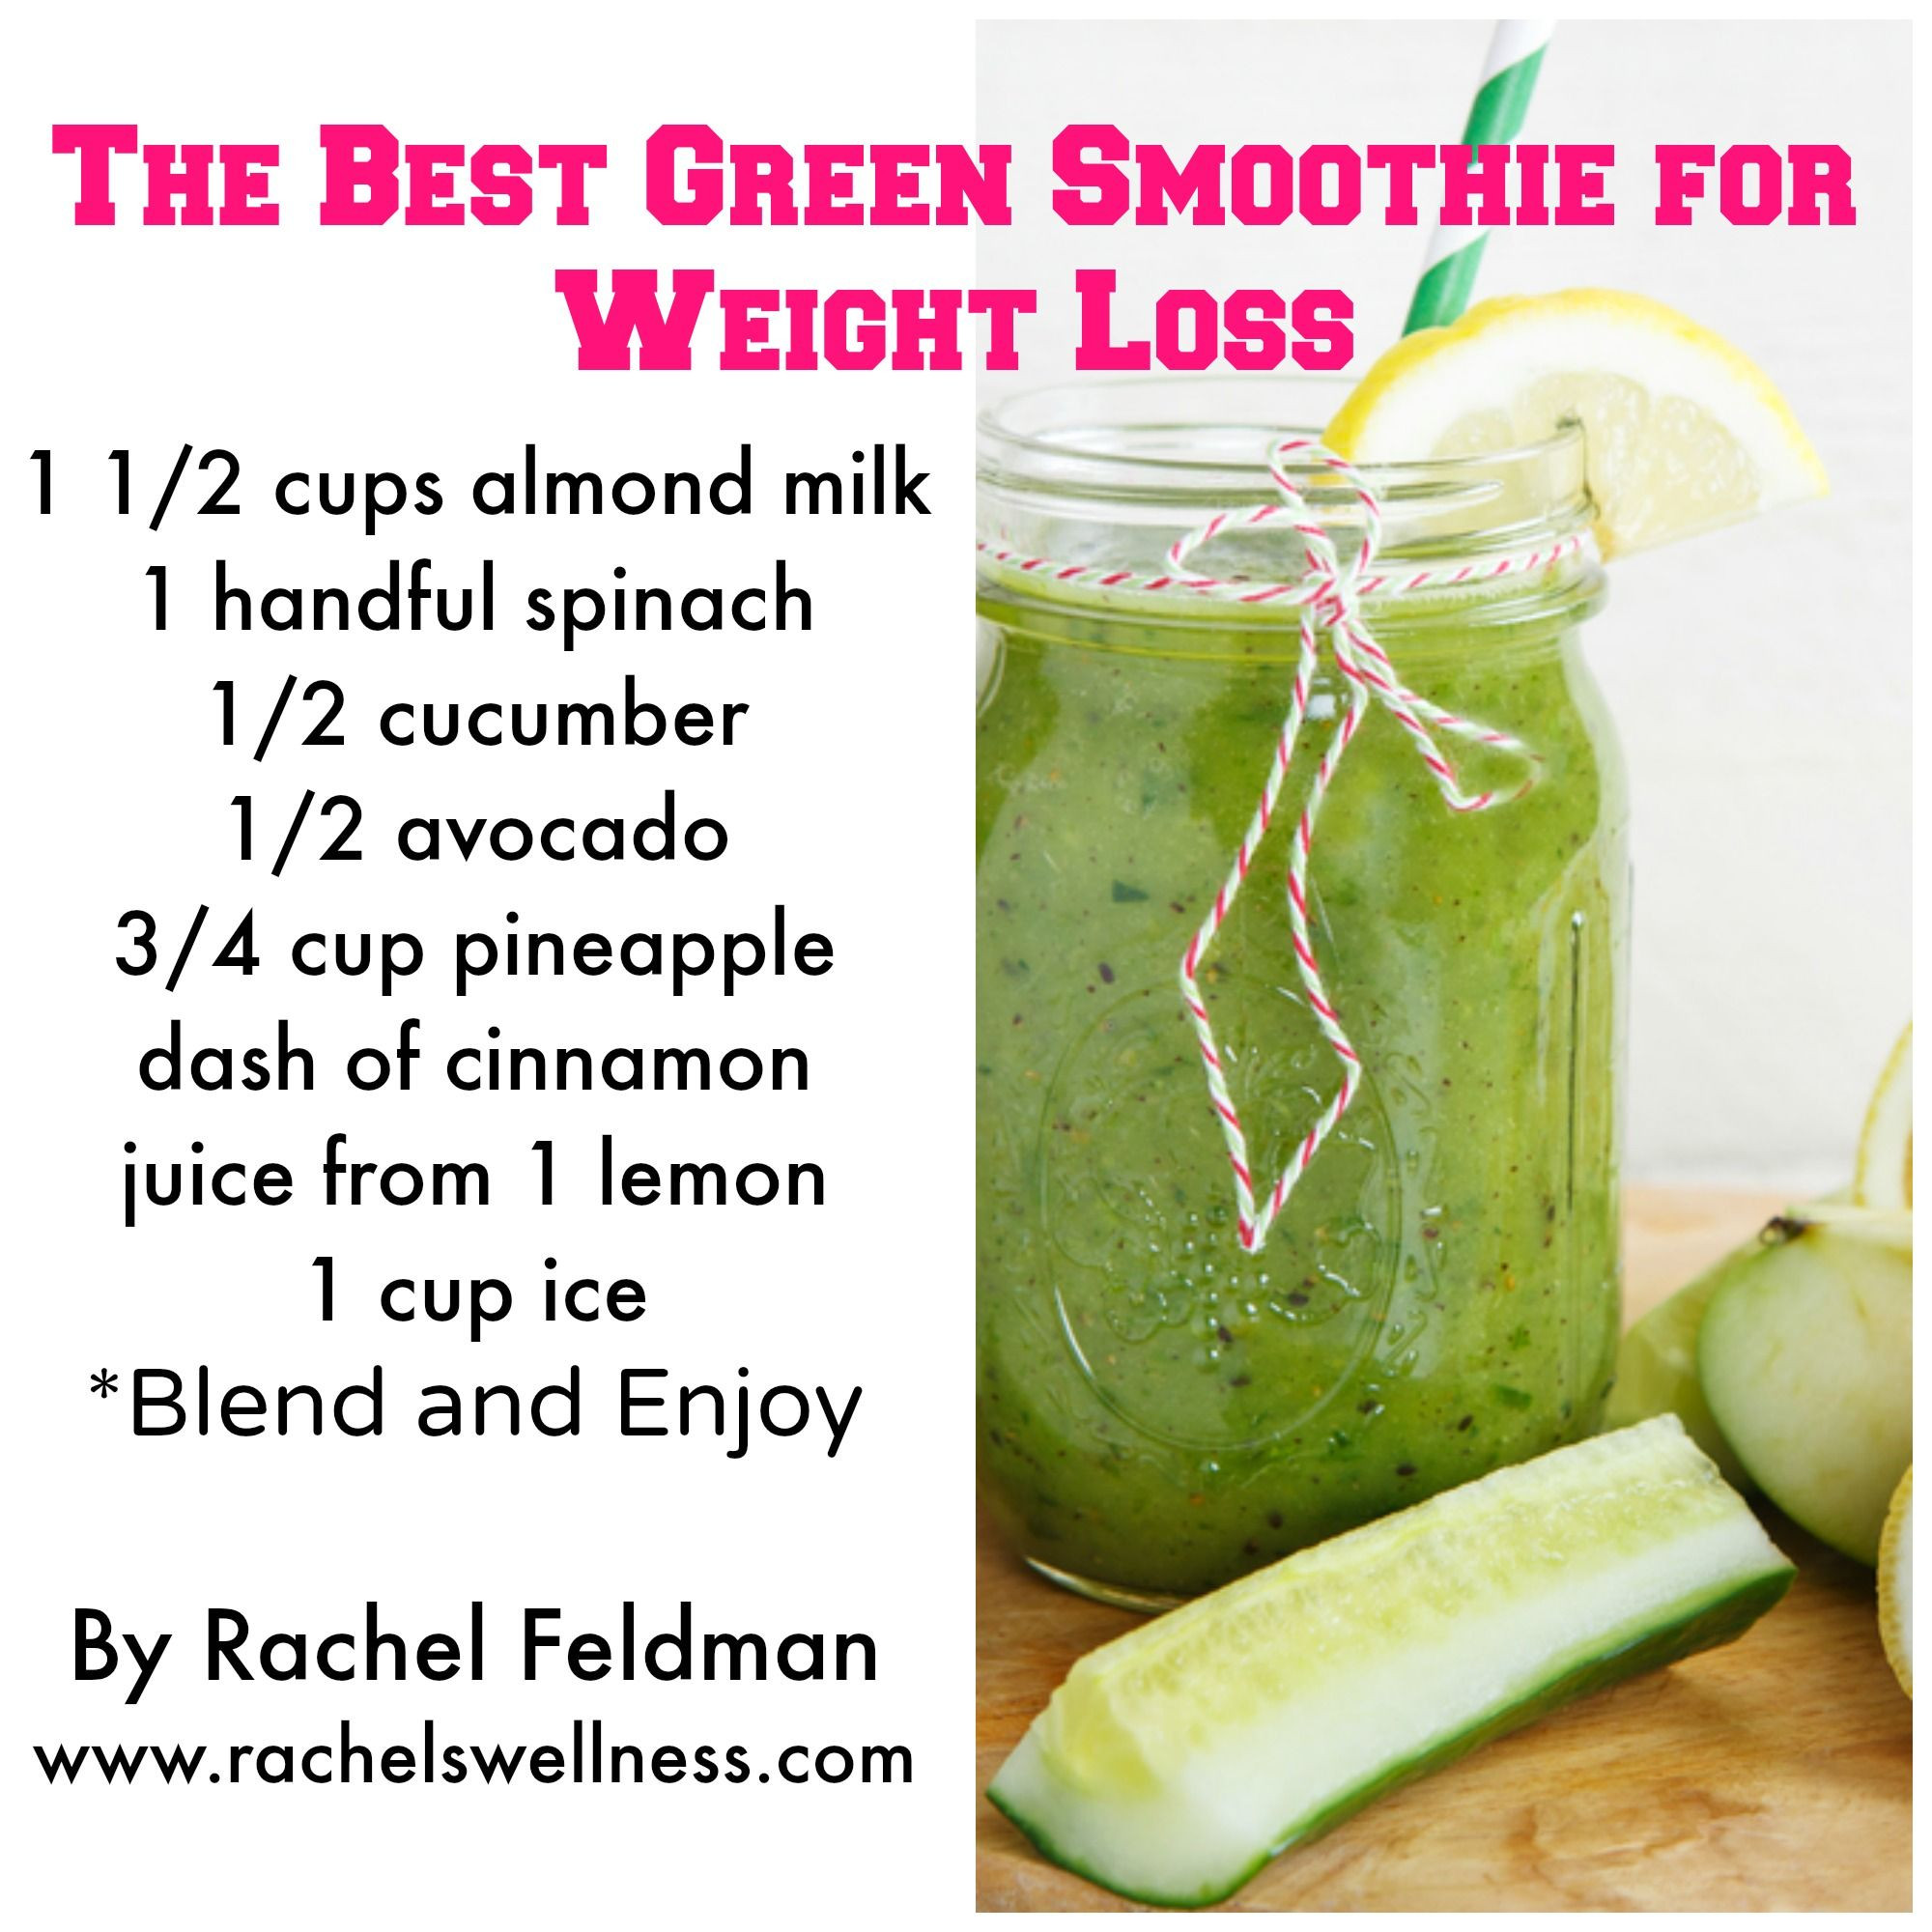 Healthy Fruit Smoothie Recipes For Weight Loss
 7 Healthy Green Smoothie Recipes For Weight Loss